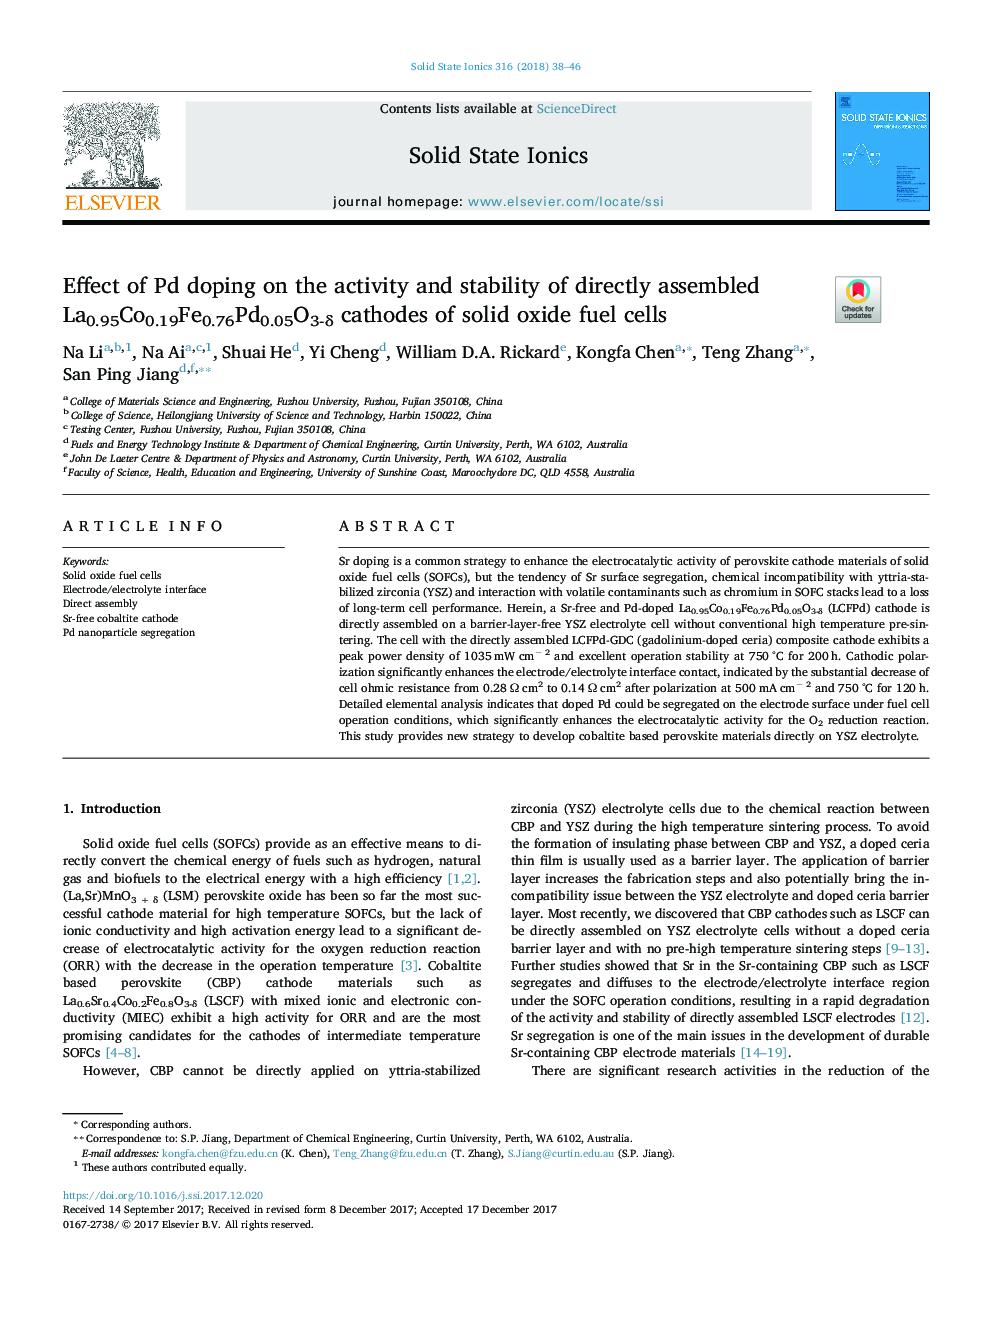 Effect of Pd doping on the activity and stability of directly assembled La0.95Co0.19Fe0.76Pd0.05O3-Î´ cathodes of solid oxide fuel cells